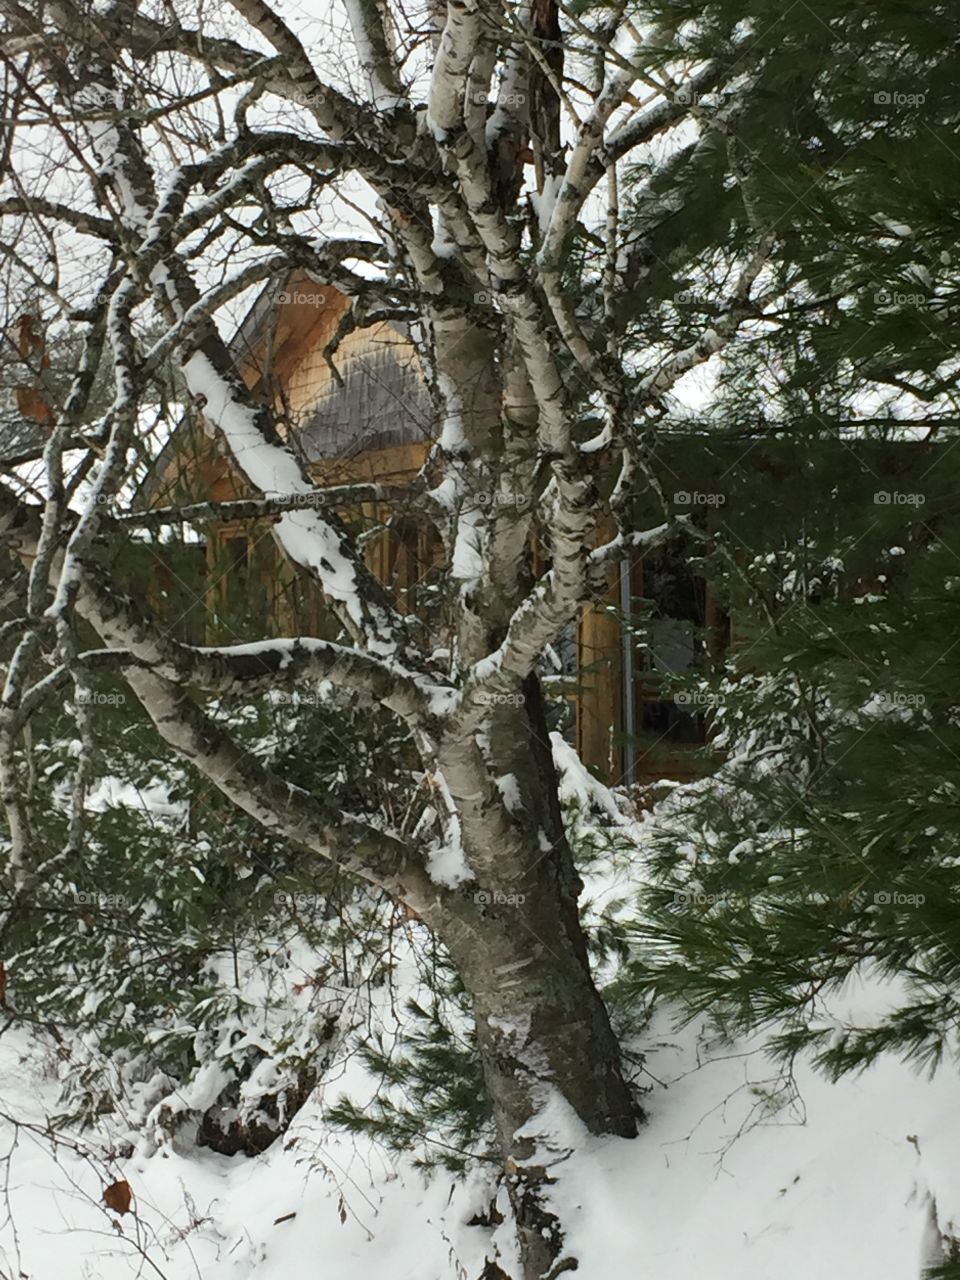 Sneak peek through the trees at the front of the lodge nestled on the French River Among the pines.